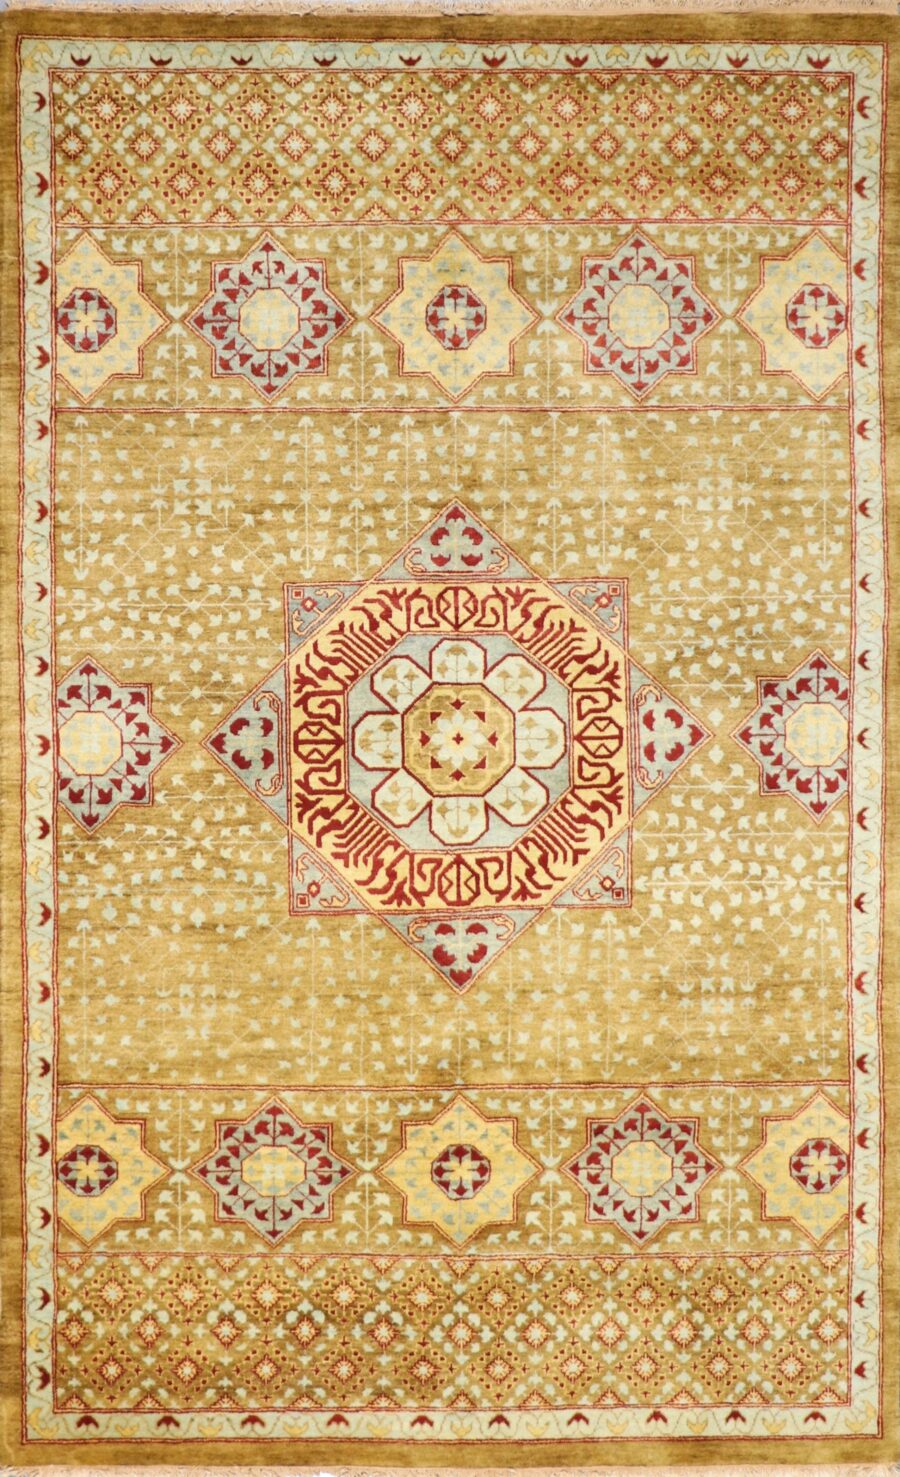 5’x8’2” Traditional Brown Wool Hand-Knotted Rug - Direct Rug Import | Rugs in Chicago, Indiana,South Bend,Granger